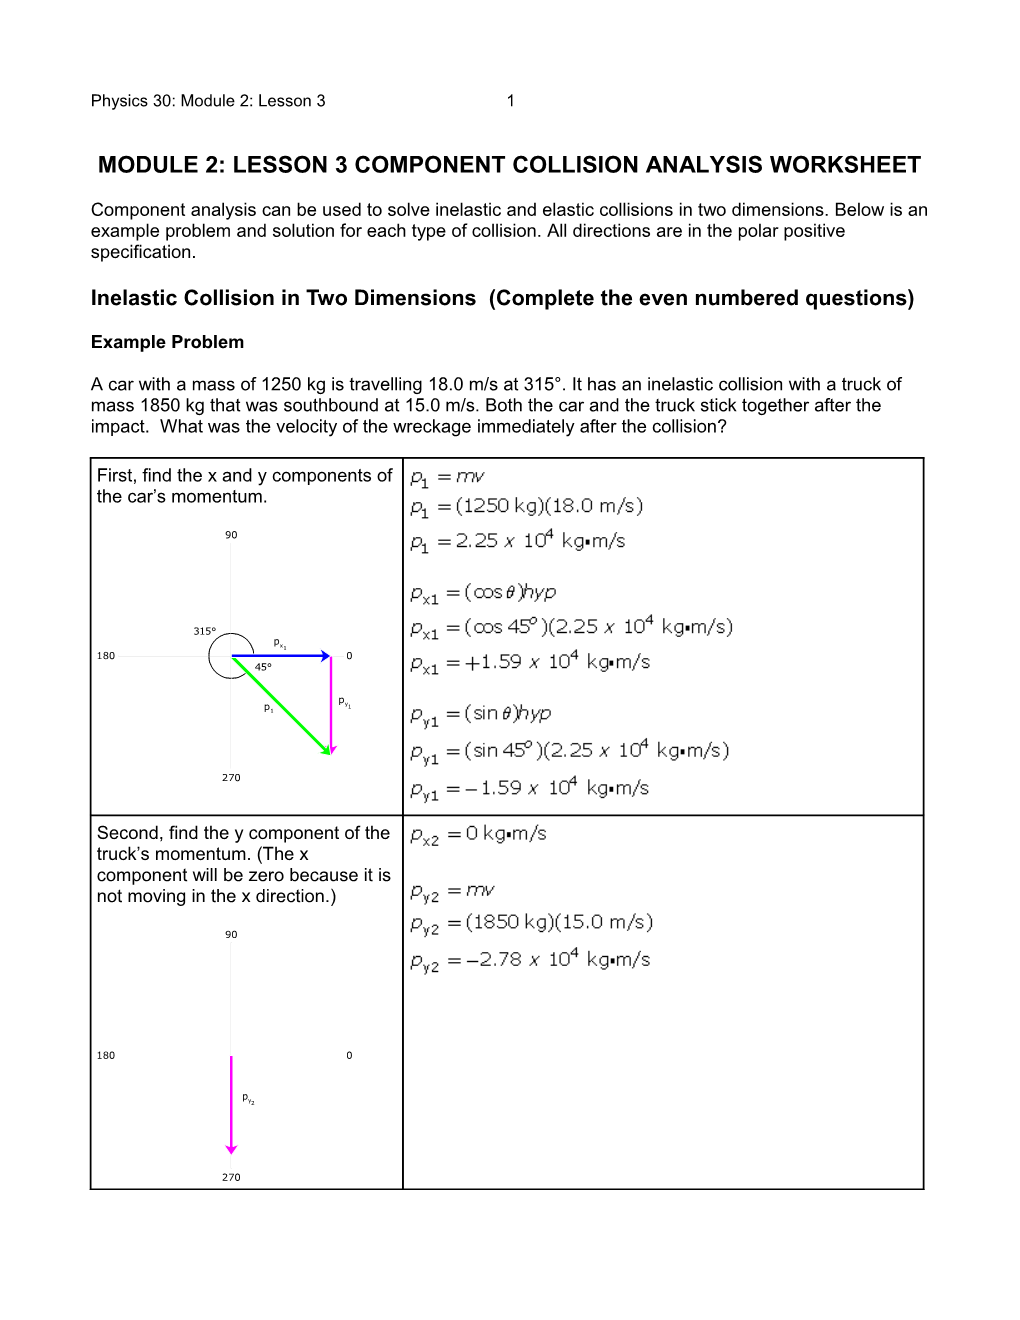 Inelastic Collision in Two Dimensions (Complete the Even Numbered Questions)